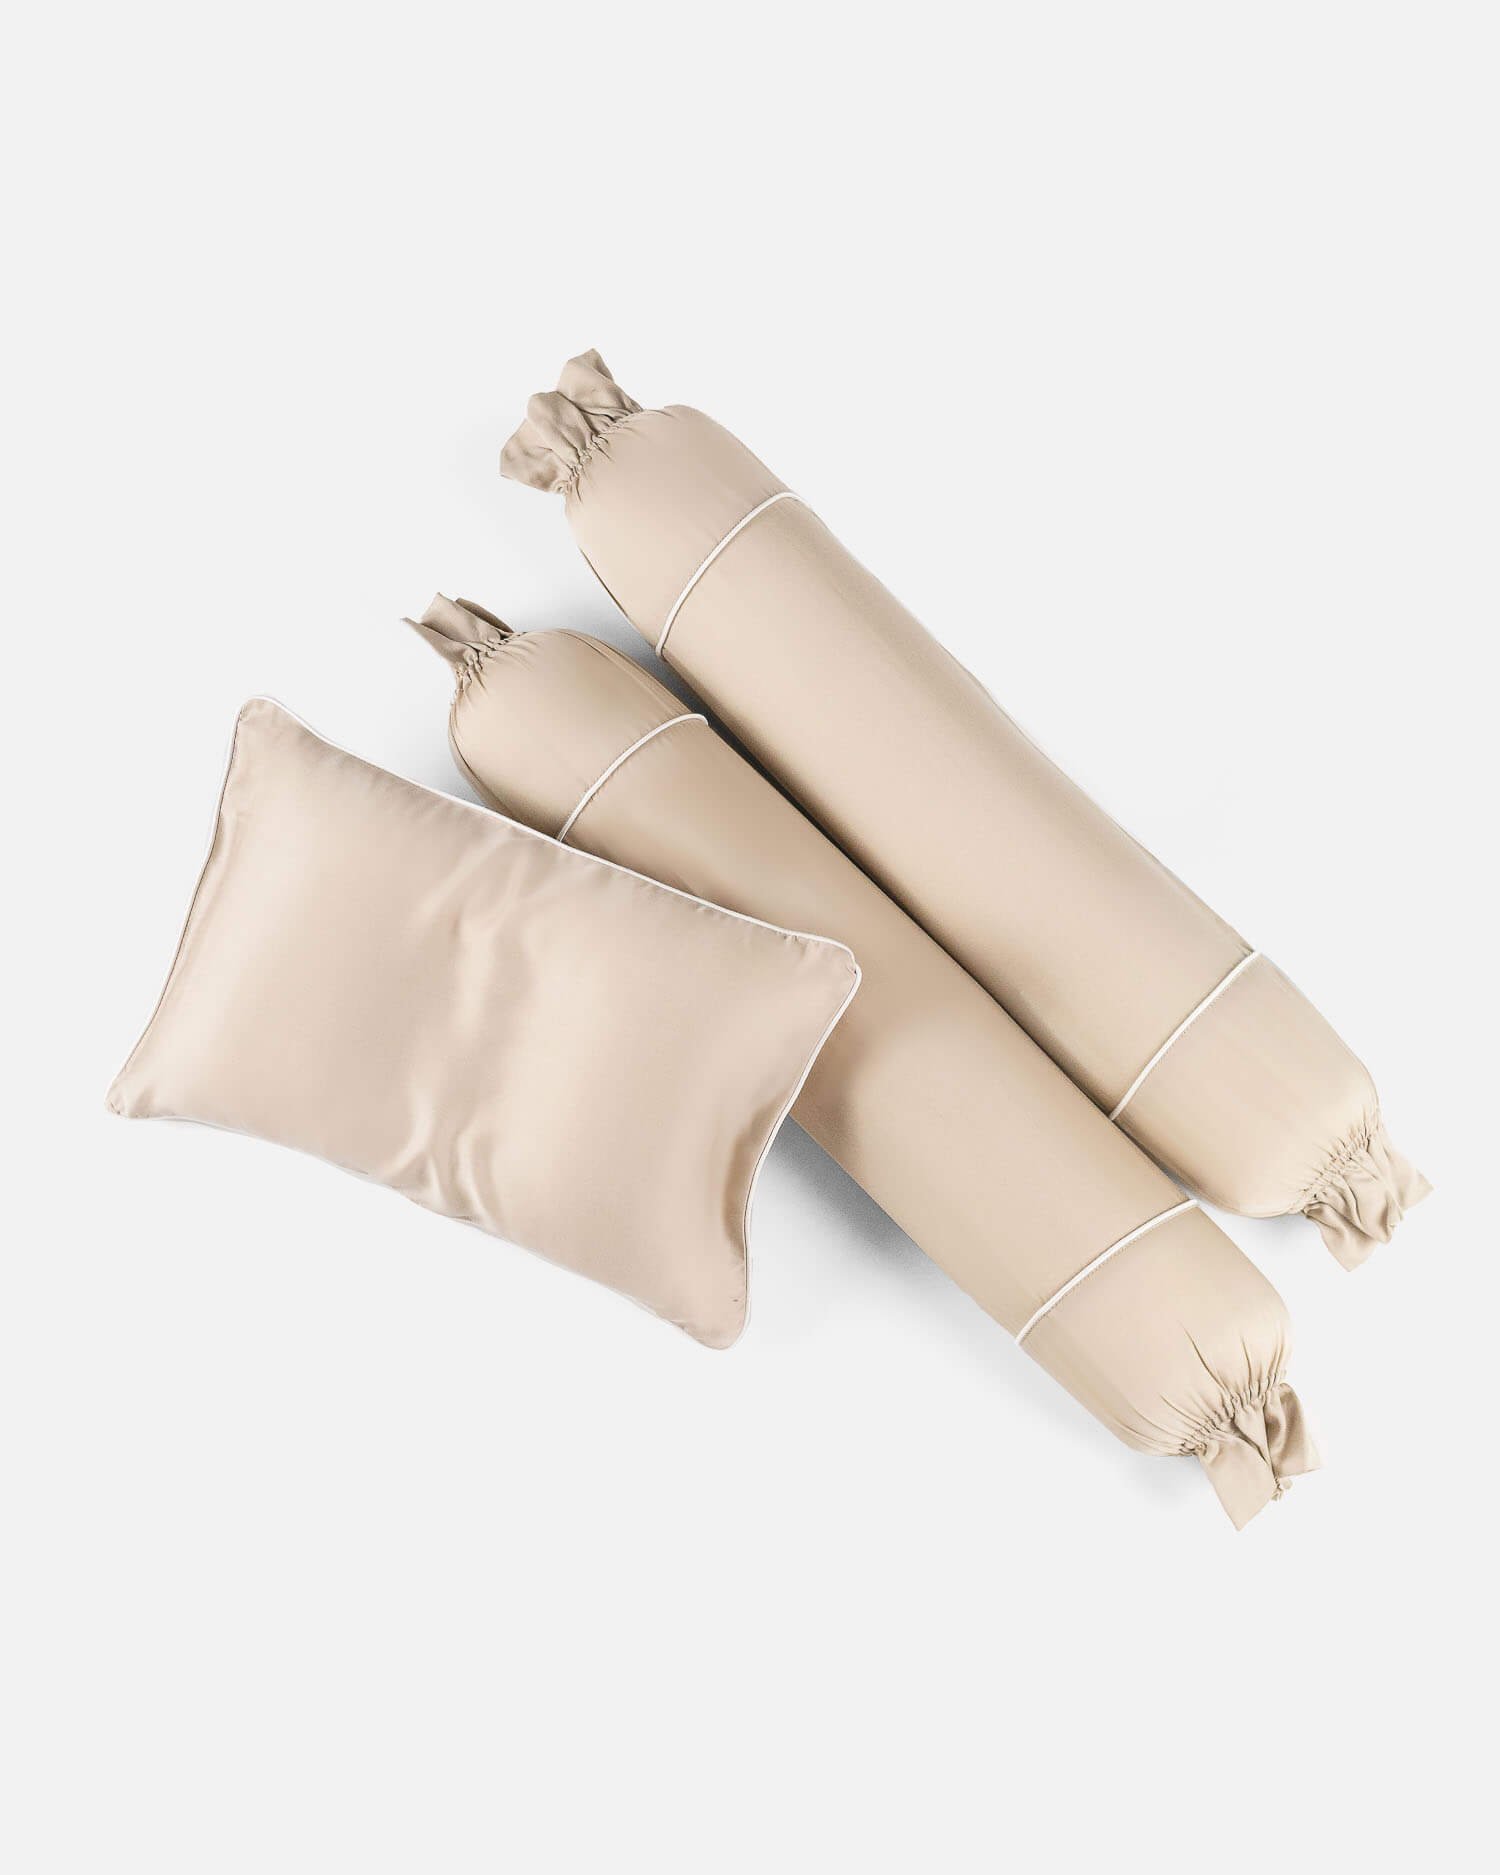 ava and ava ph organic bamboo lyocell baby pillowcase set - pillowcase, 2 bolstercases in sandshell (sand beige with white piping)